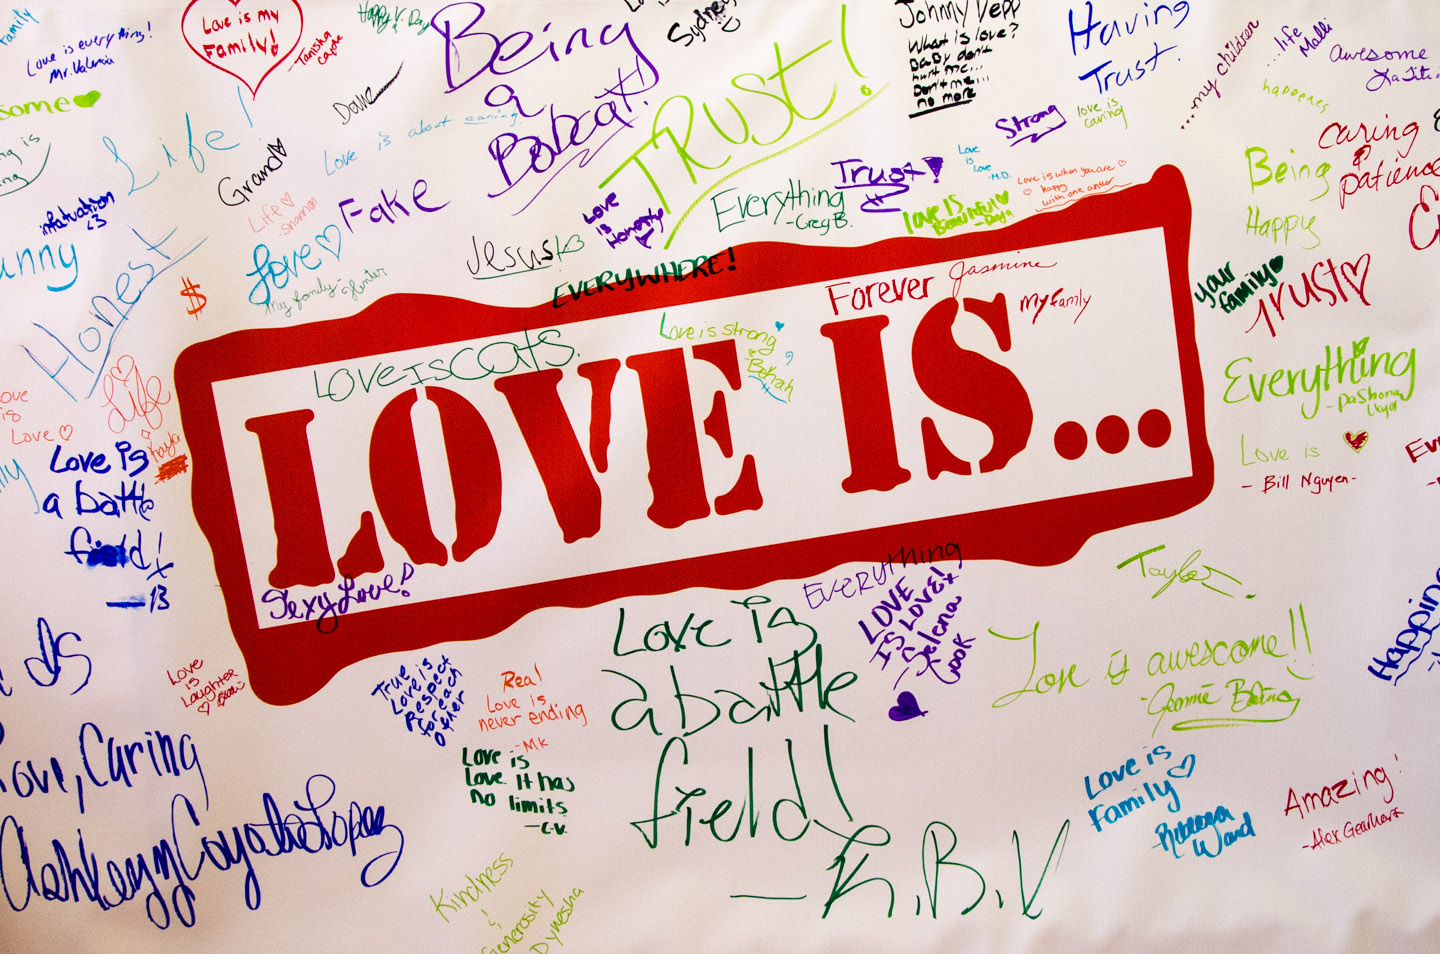 Student inscriptions filled the “Love is…” banner on Valentine’s Day.